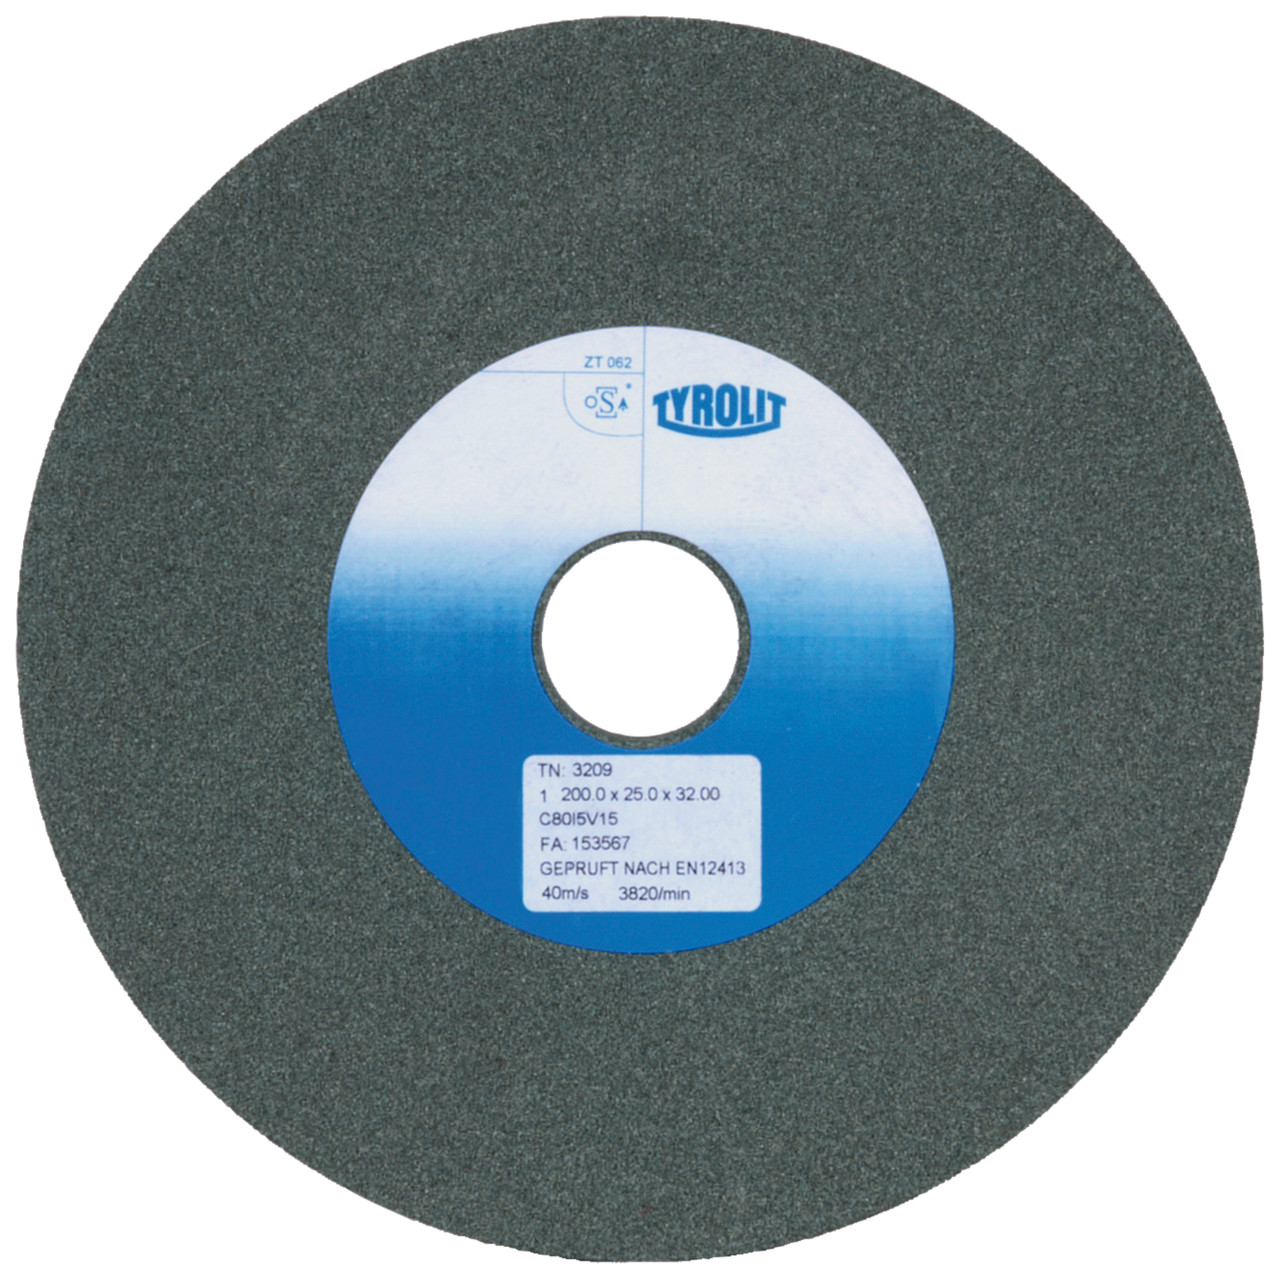 Tyrolit Conventional ceramic grinding discs DxDxH 203x25x32 For carbide and cast iron, shape: 1, Art. 59861